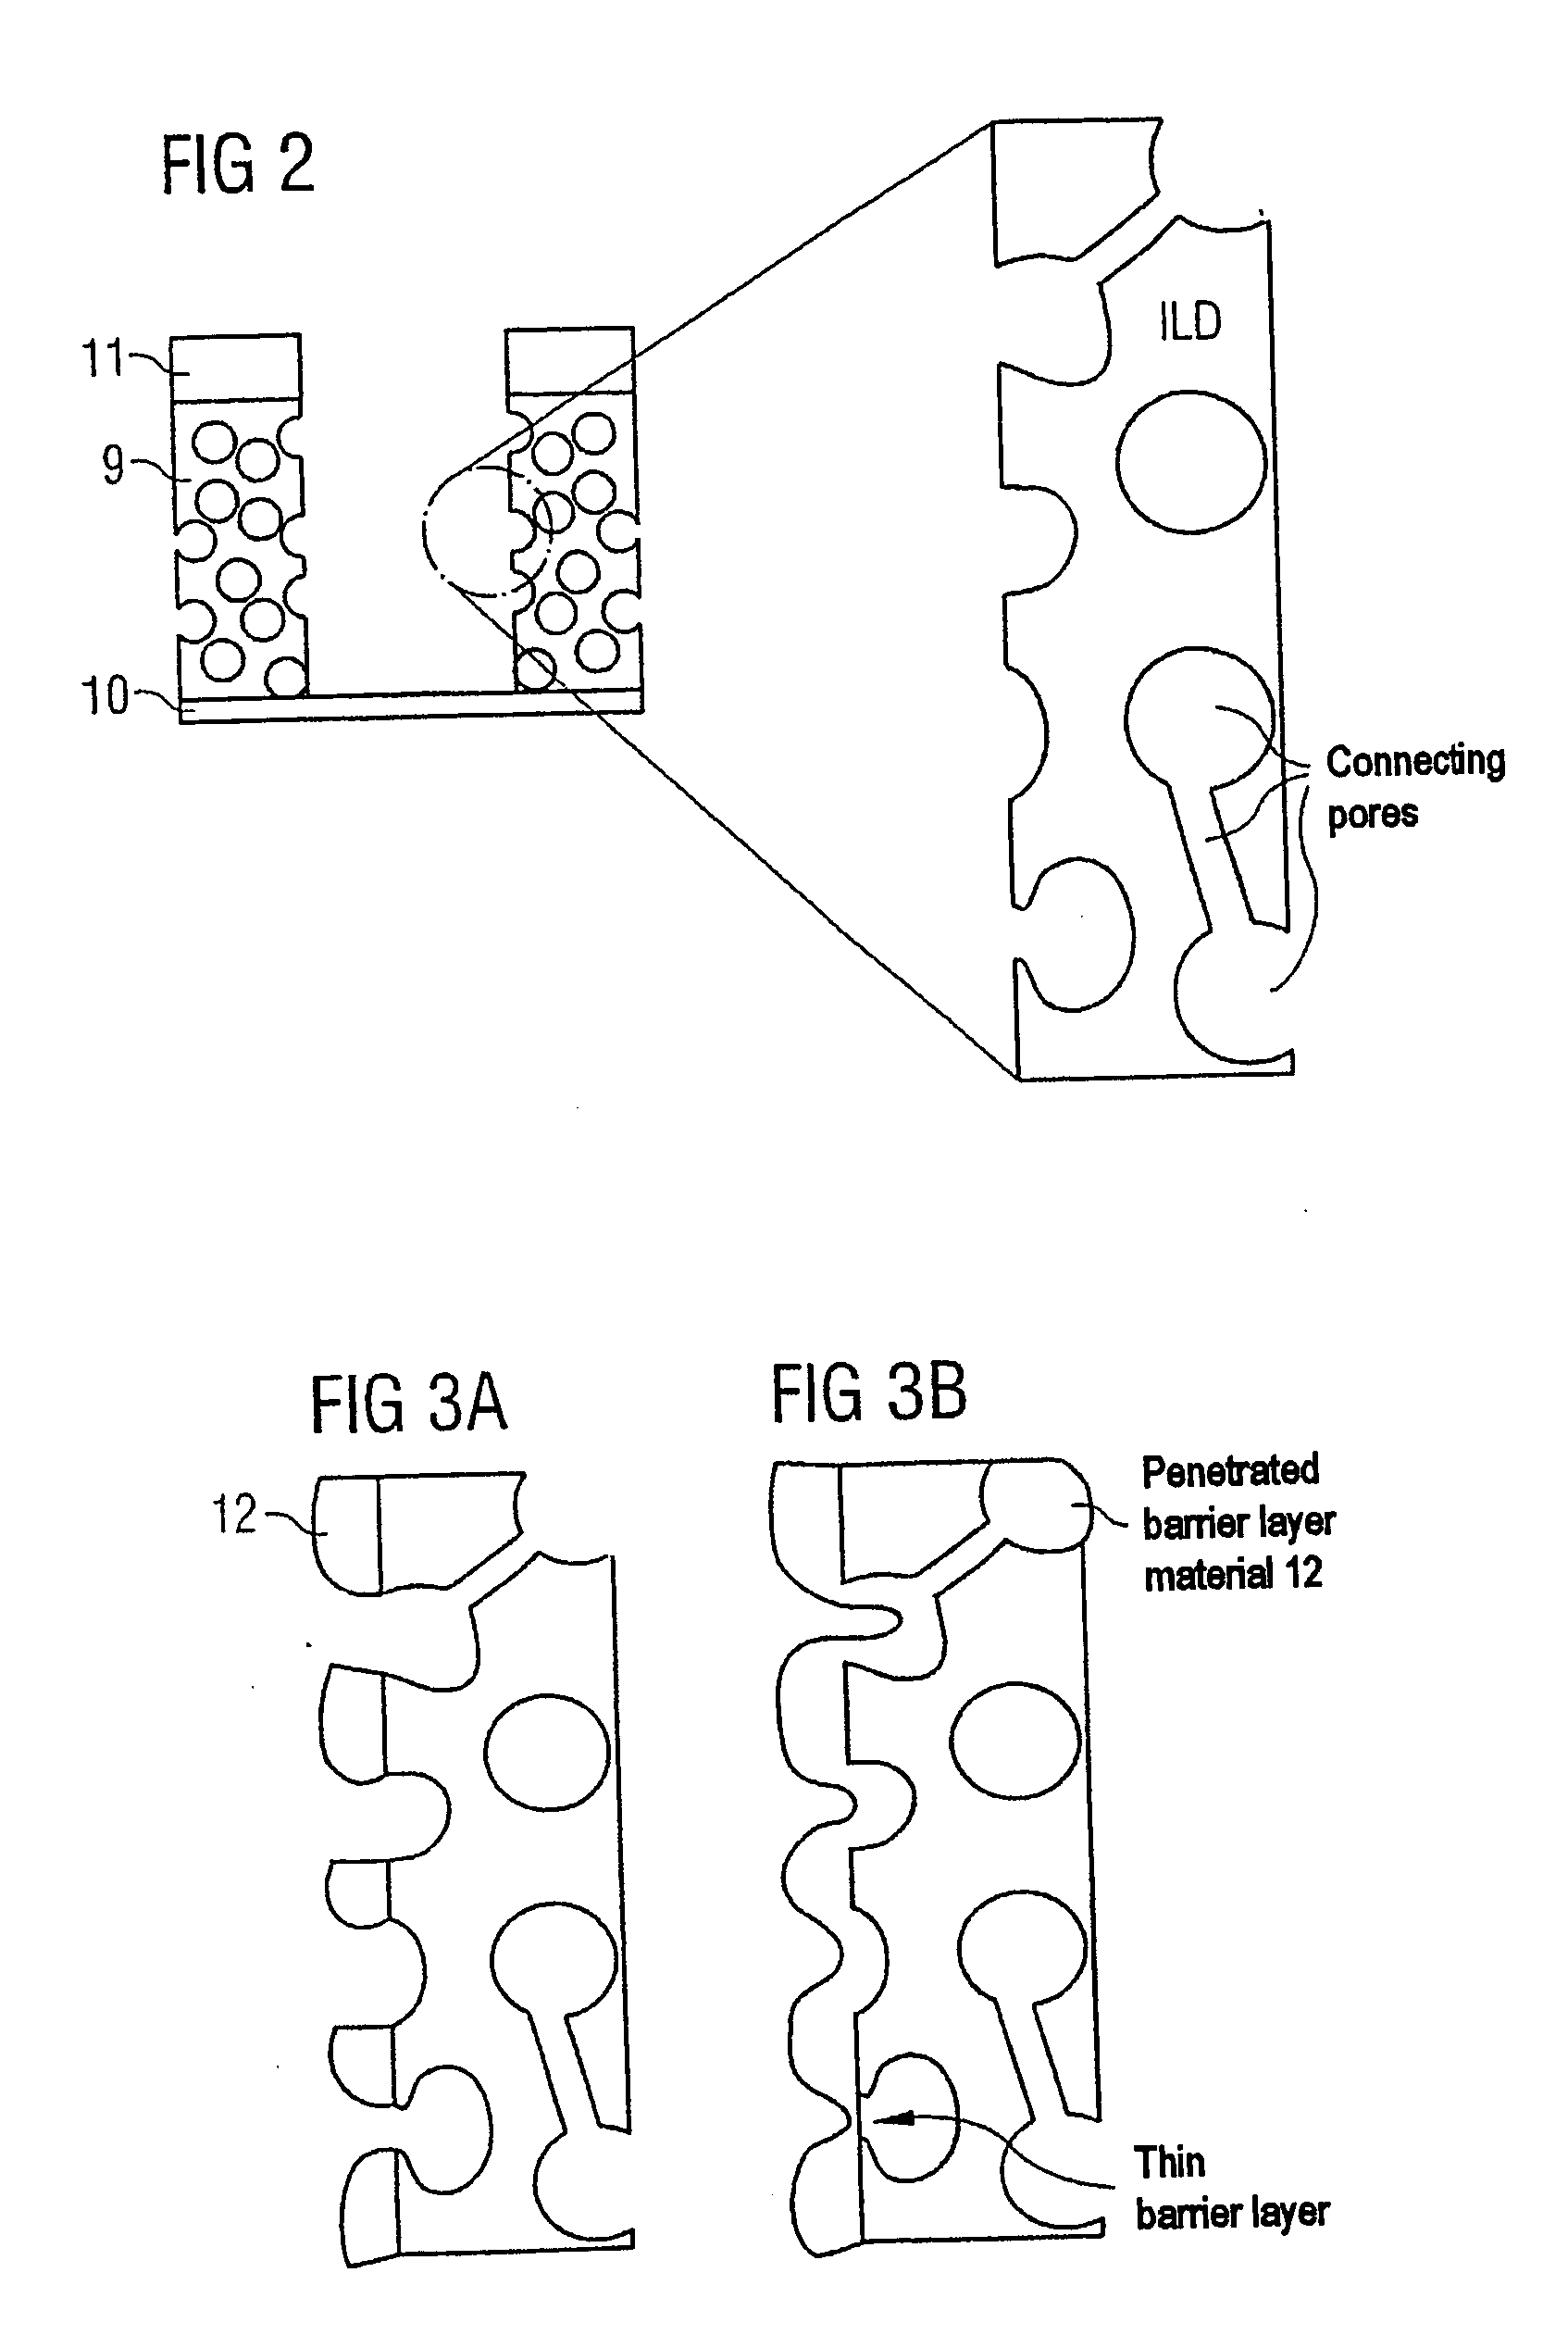 Method for sealing porous materials during chip production and compounds therefor